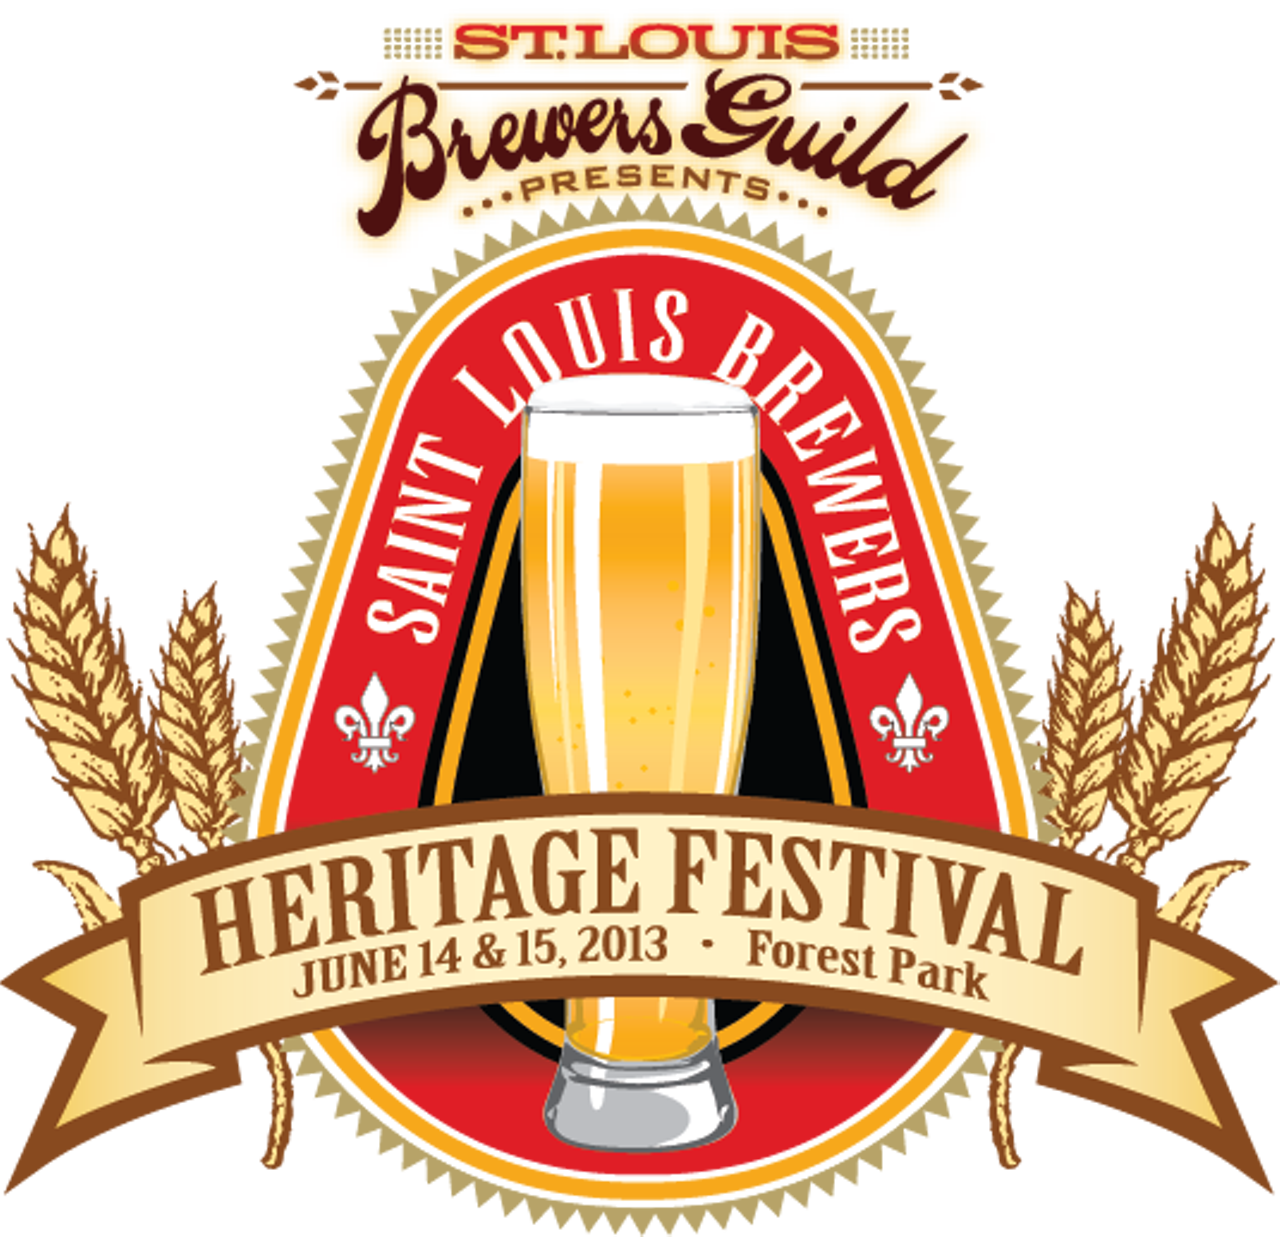 St. Louis Brewers Heritage Festival